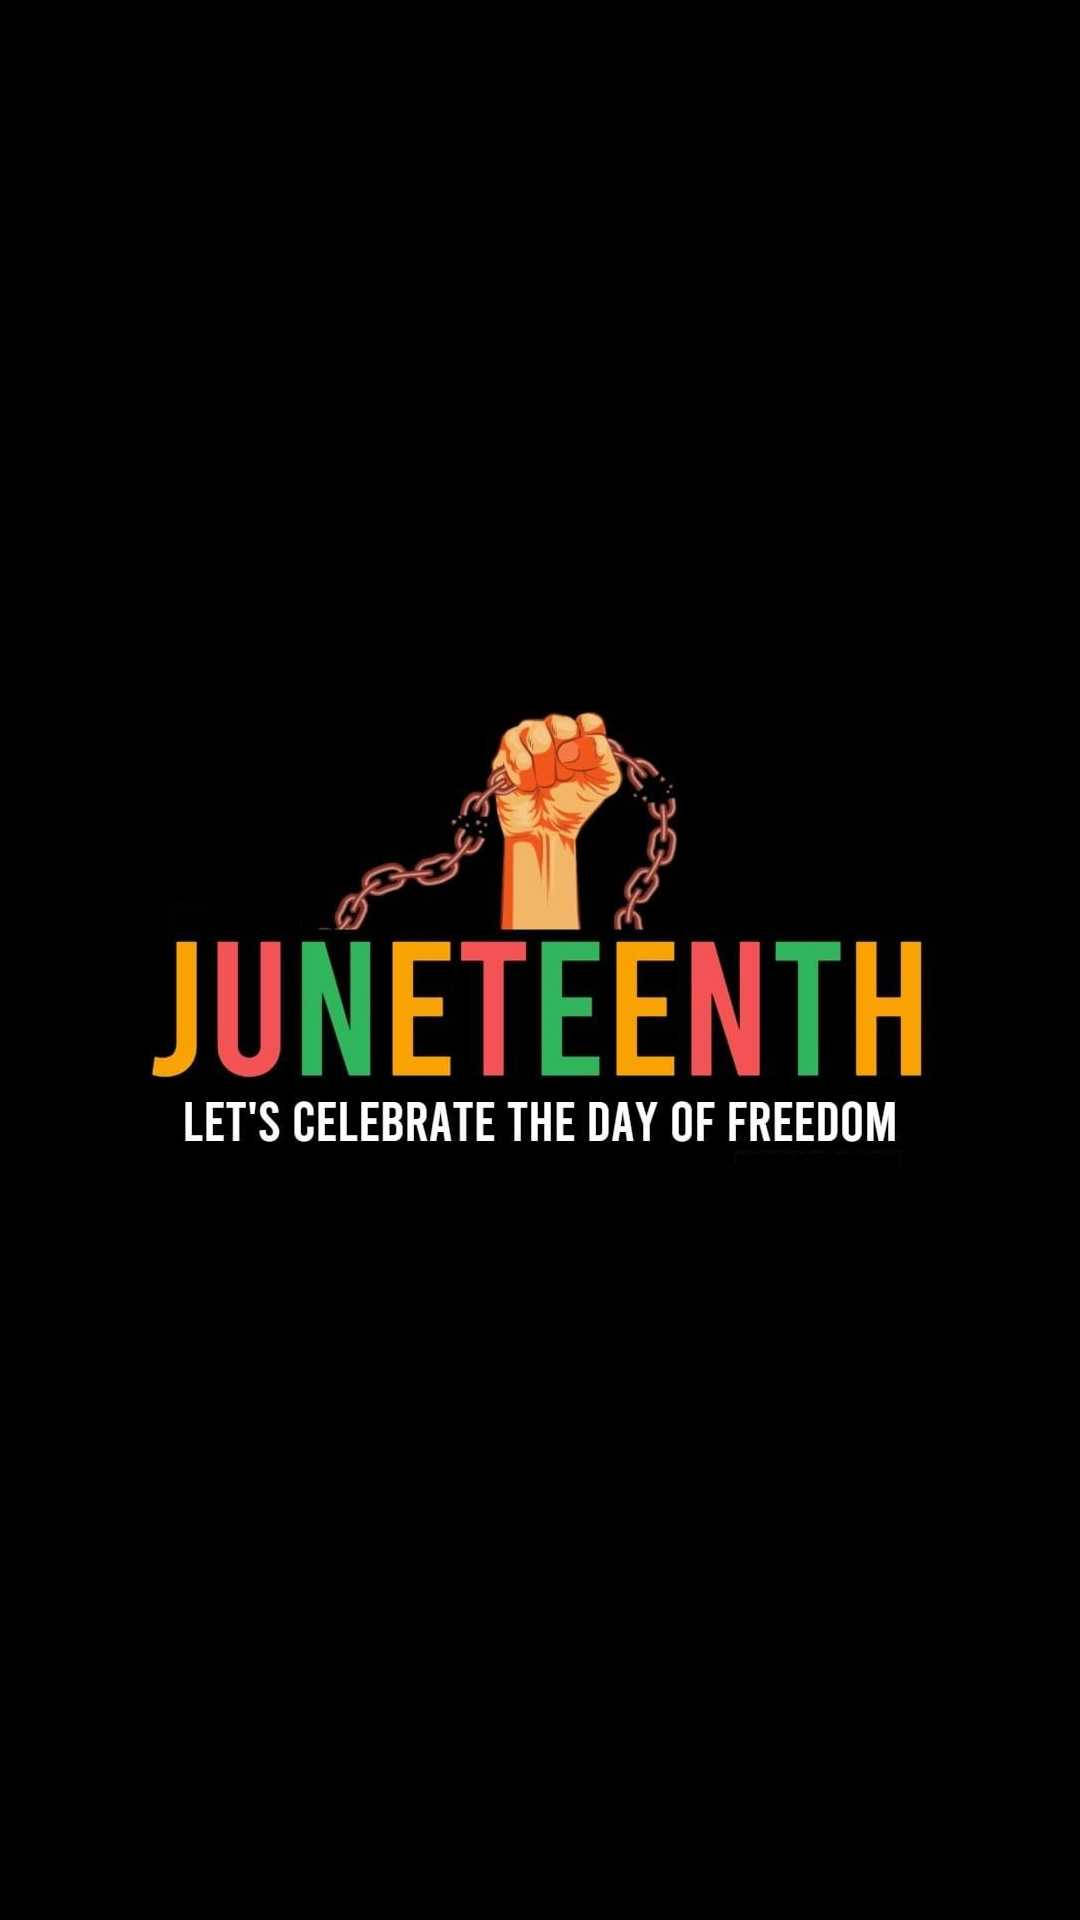 Juneteenth Closed Fist Illustration With Chain Background